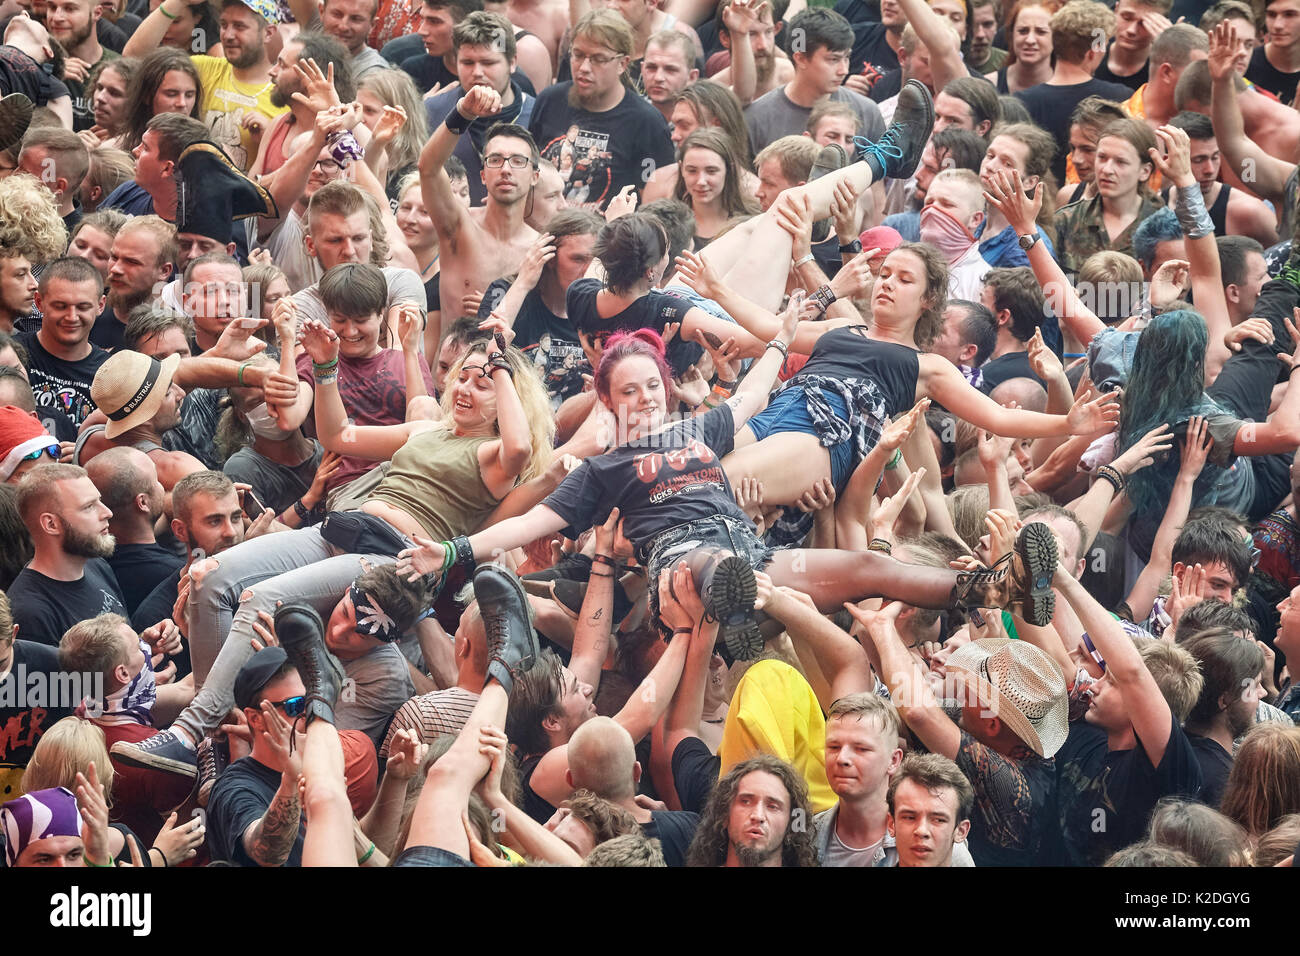 Kostrzyn, Poland - August 05, 2017: People having fun at a concert during the 23rd Woodstock Festival Poland. Stock Photo